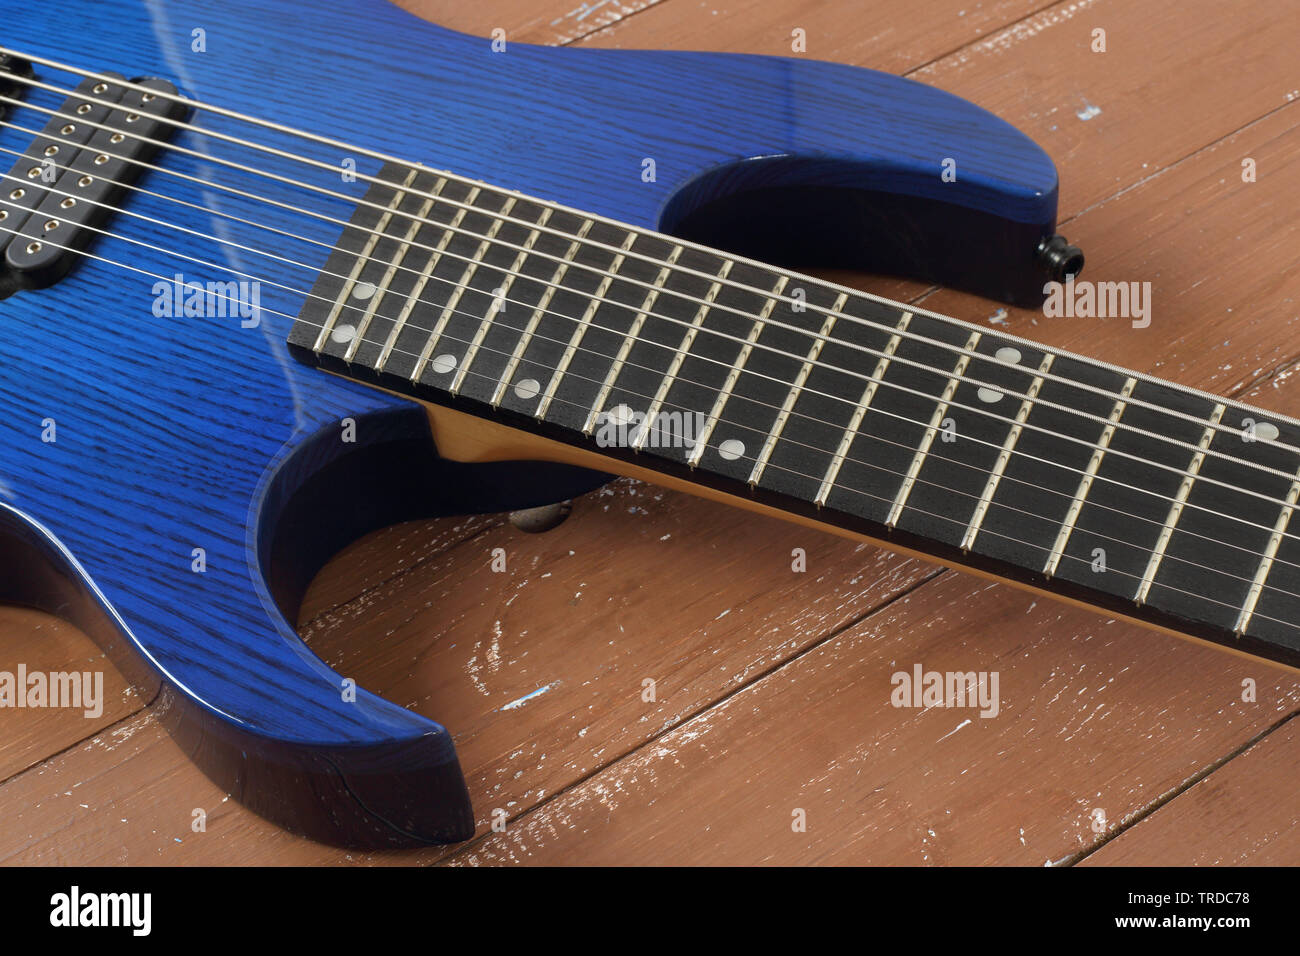 Musical instrument - Fragment 8-string blue electric guitar solid-body on a wood background Stock Photo